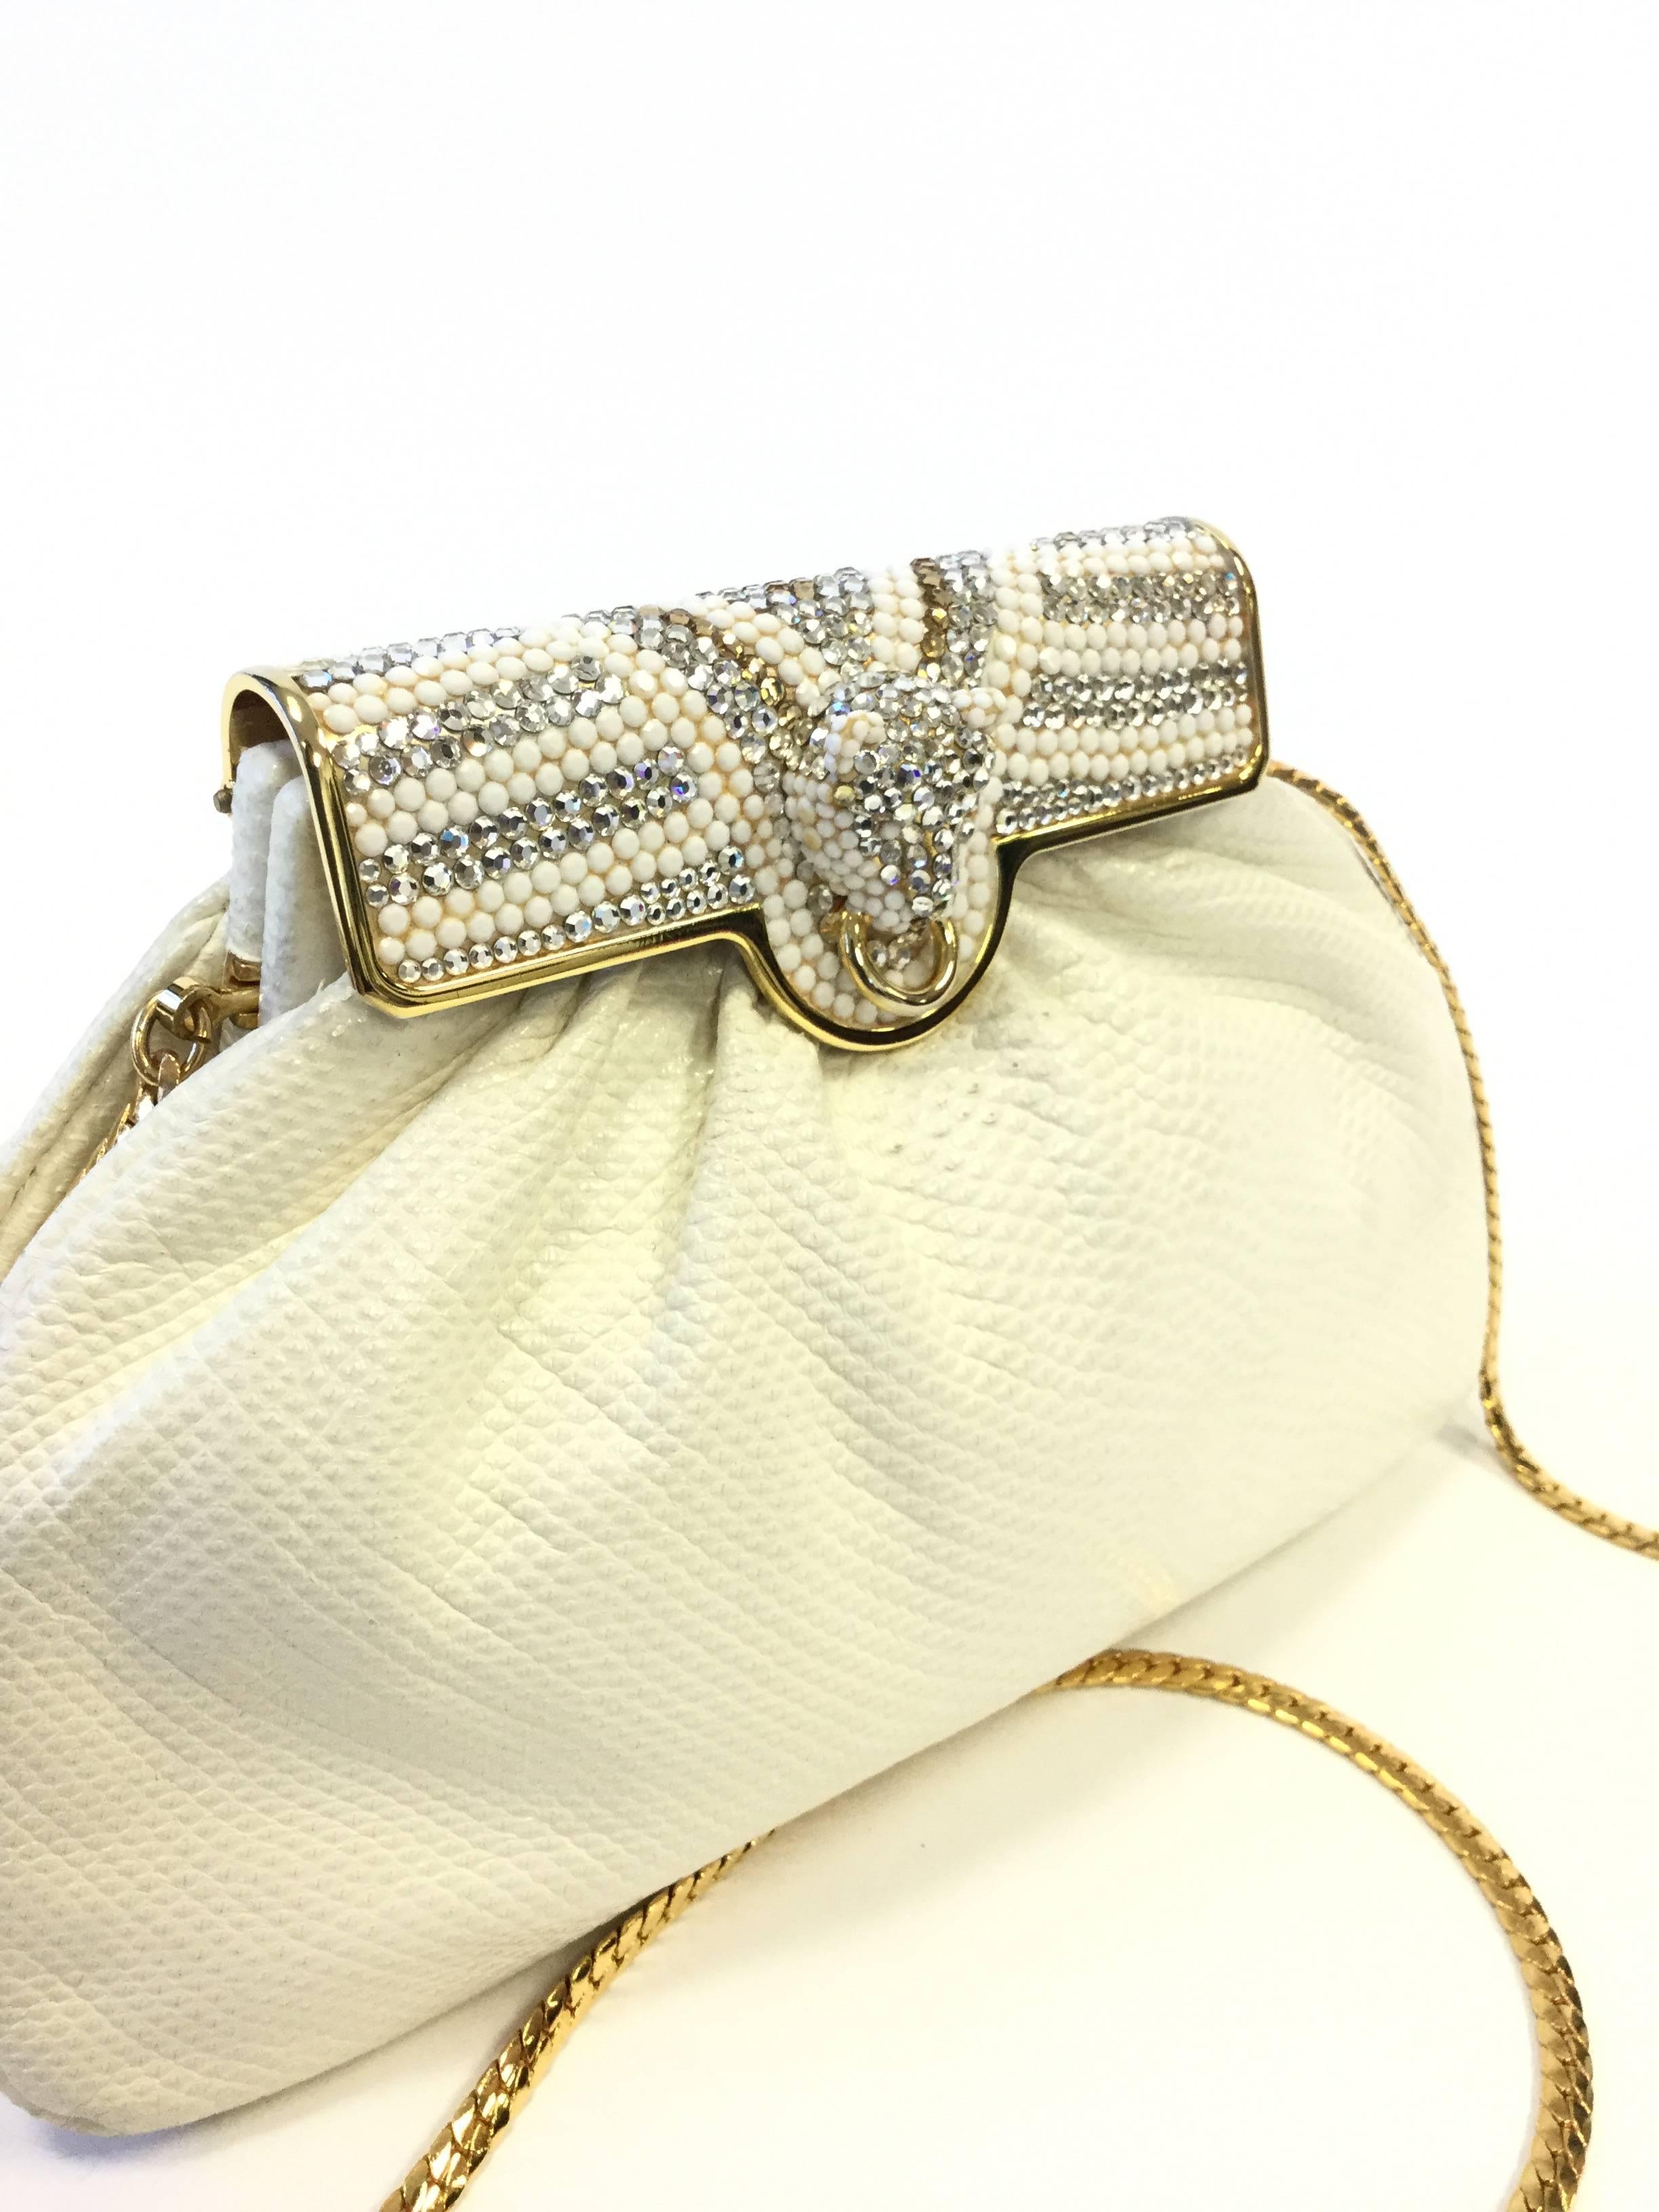 
Stunning and glamorous evening purse by Finesse La Model! This evening purse has a soft, white, plush snakeskin body with an ornate seed bead and rhinestone clasp. The clasp has a puma head design on it; the big cat is encrusted with rhinestones,